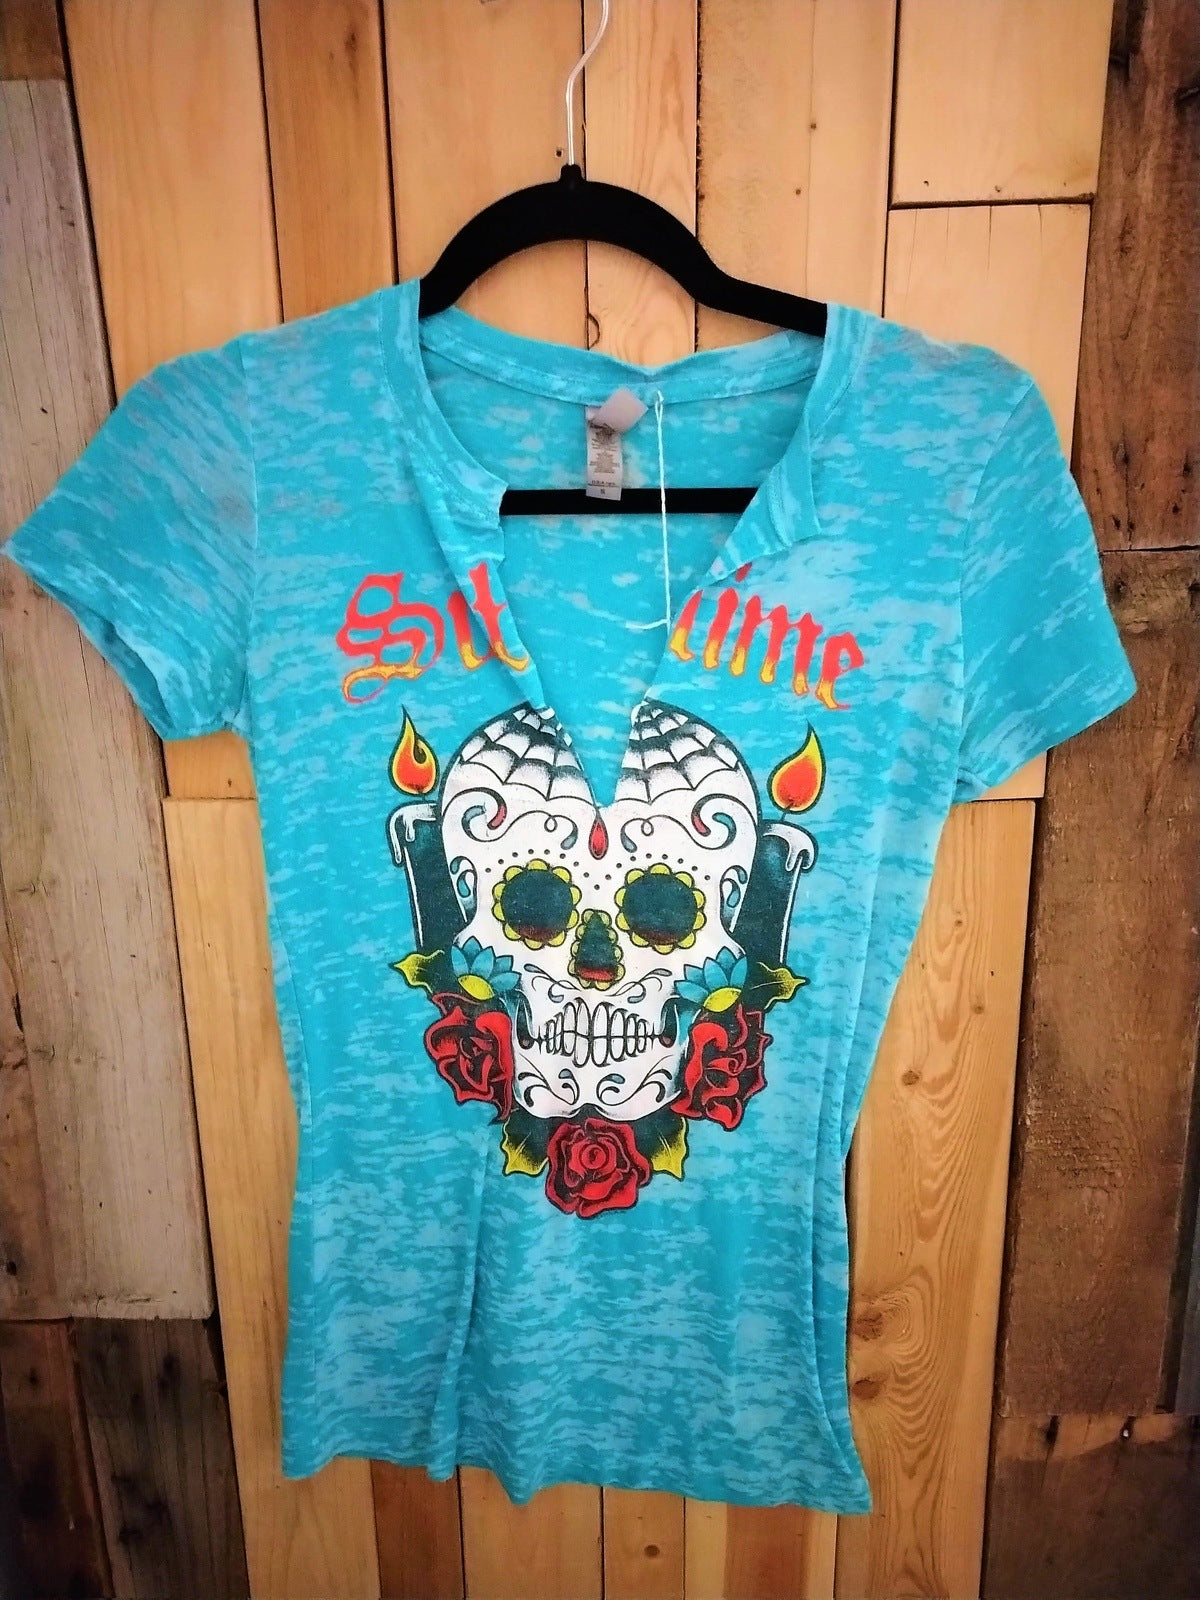 Sublime Altered Tee Shirt Women's Small